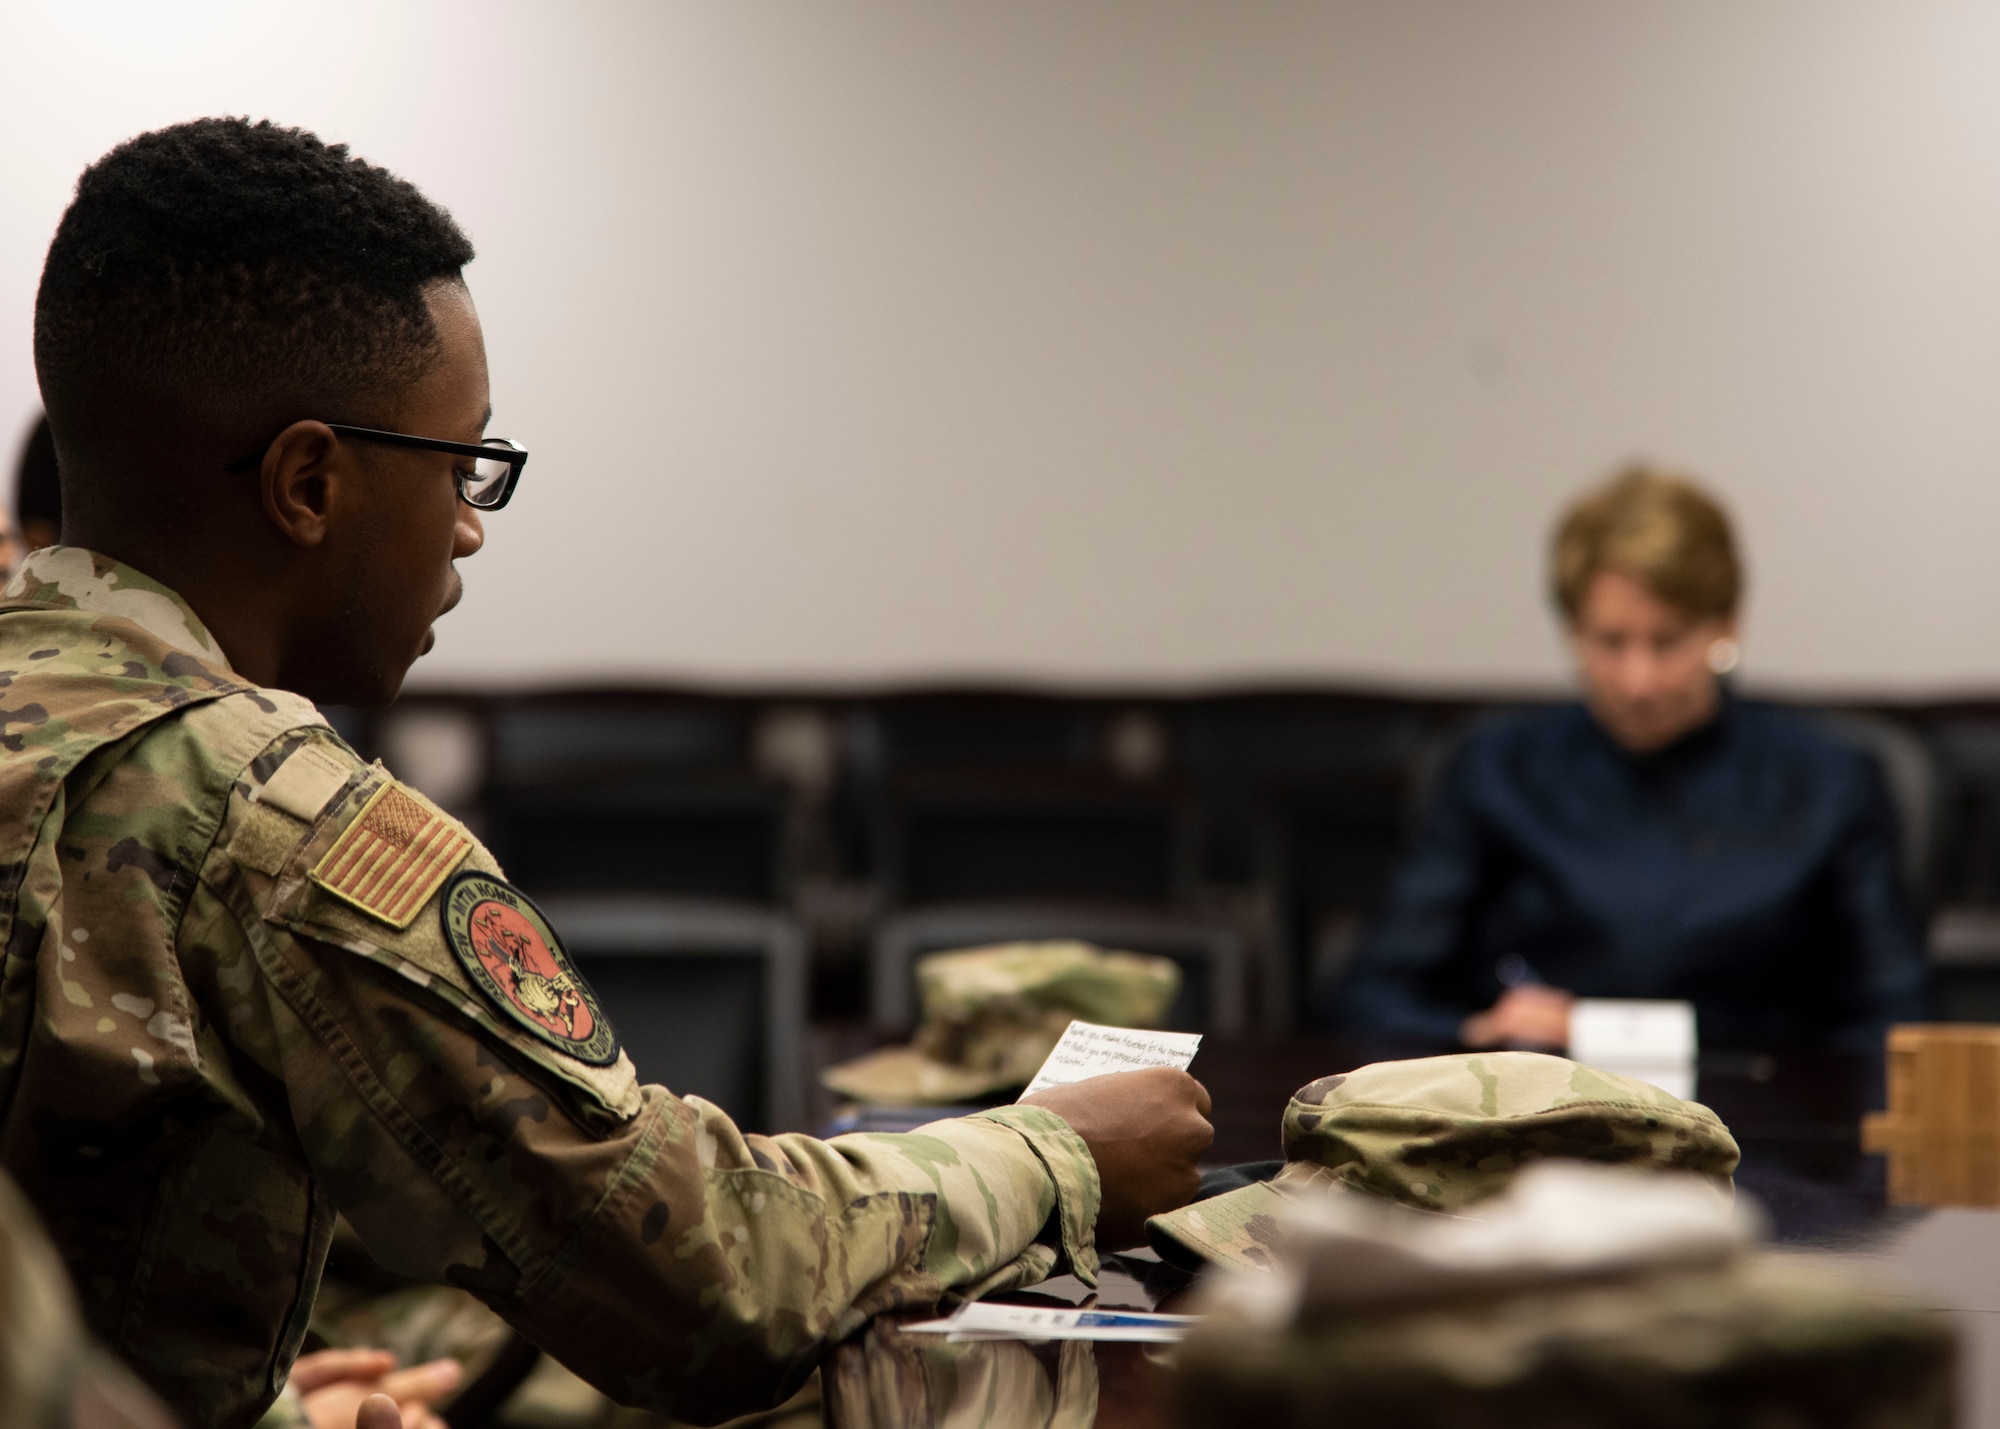 Secretary of the Air Force Barbara Barrett listens to feedback from Airmen about improving diversity and inclusion in the military during a listening session Sept. 24, 2020, at Mountain Home Air Force Base, Idaho. (U.S. Air Force photo by Airman Andrea Rozoto)